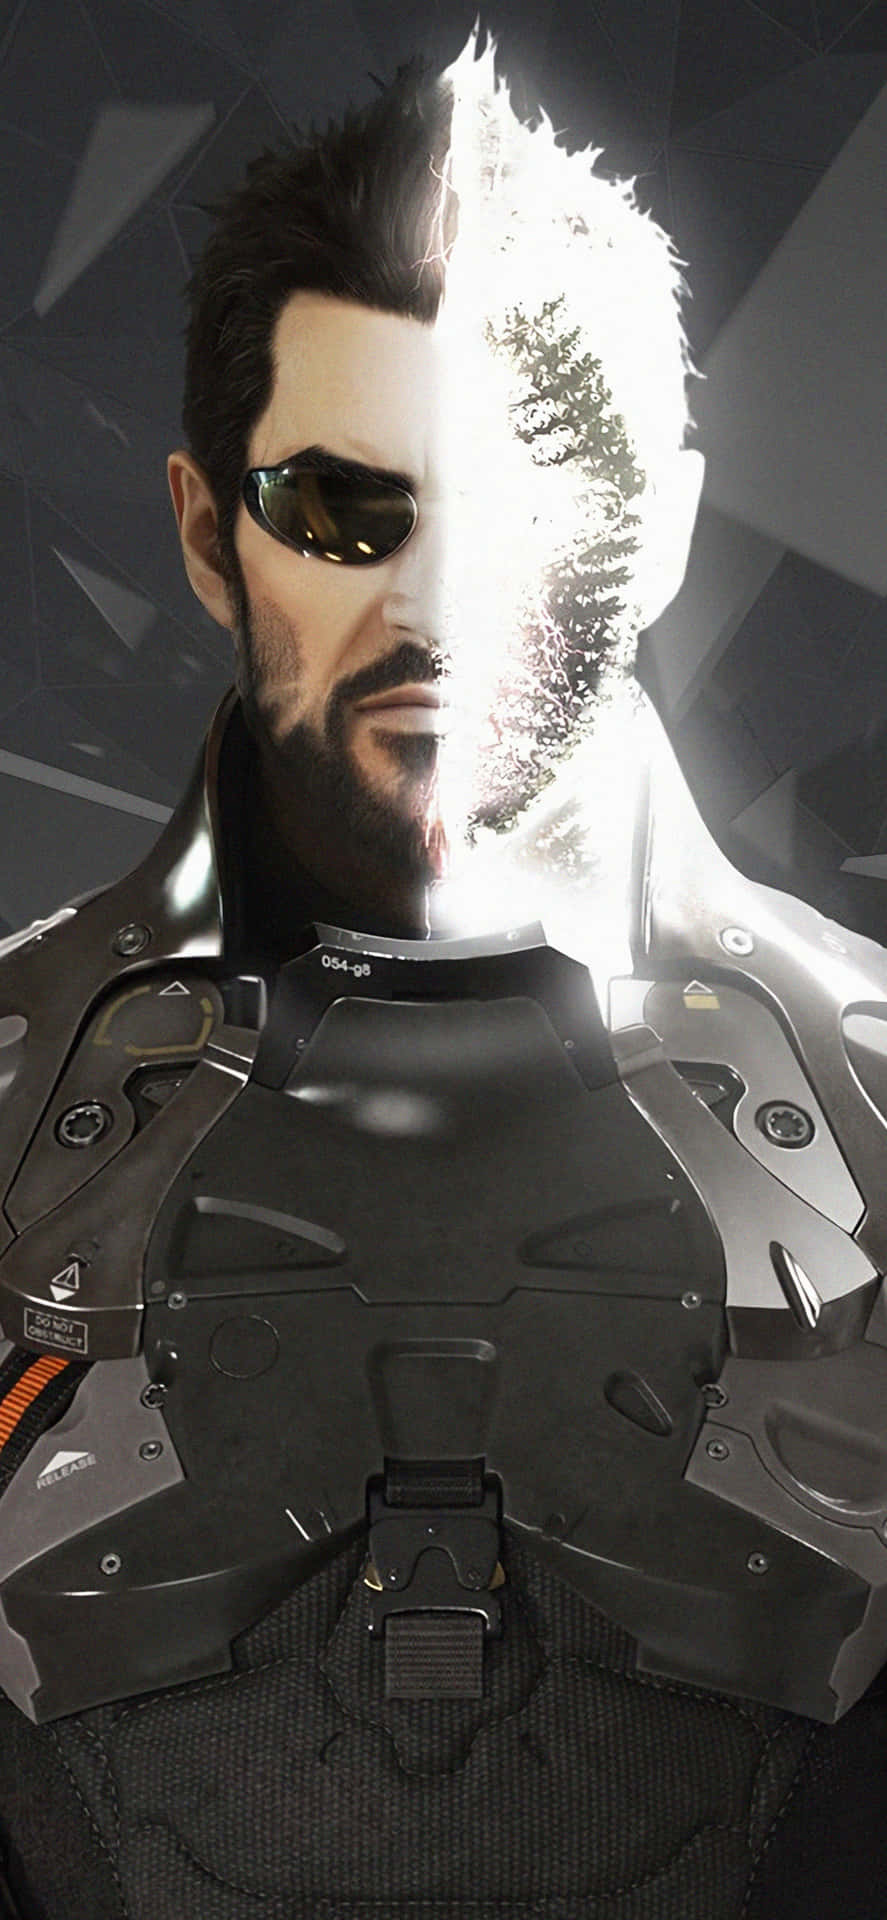 Ready to explore and uncover the mysteries of the Android Deus Ex Mankind Divided universe?